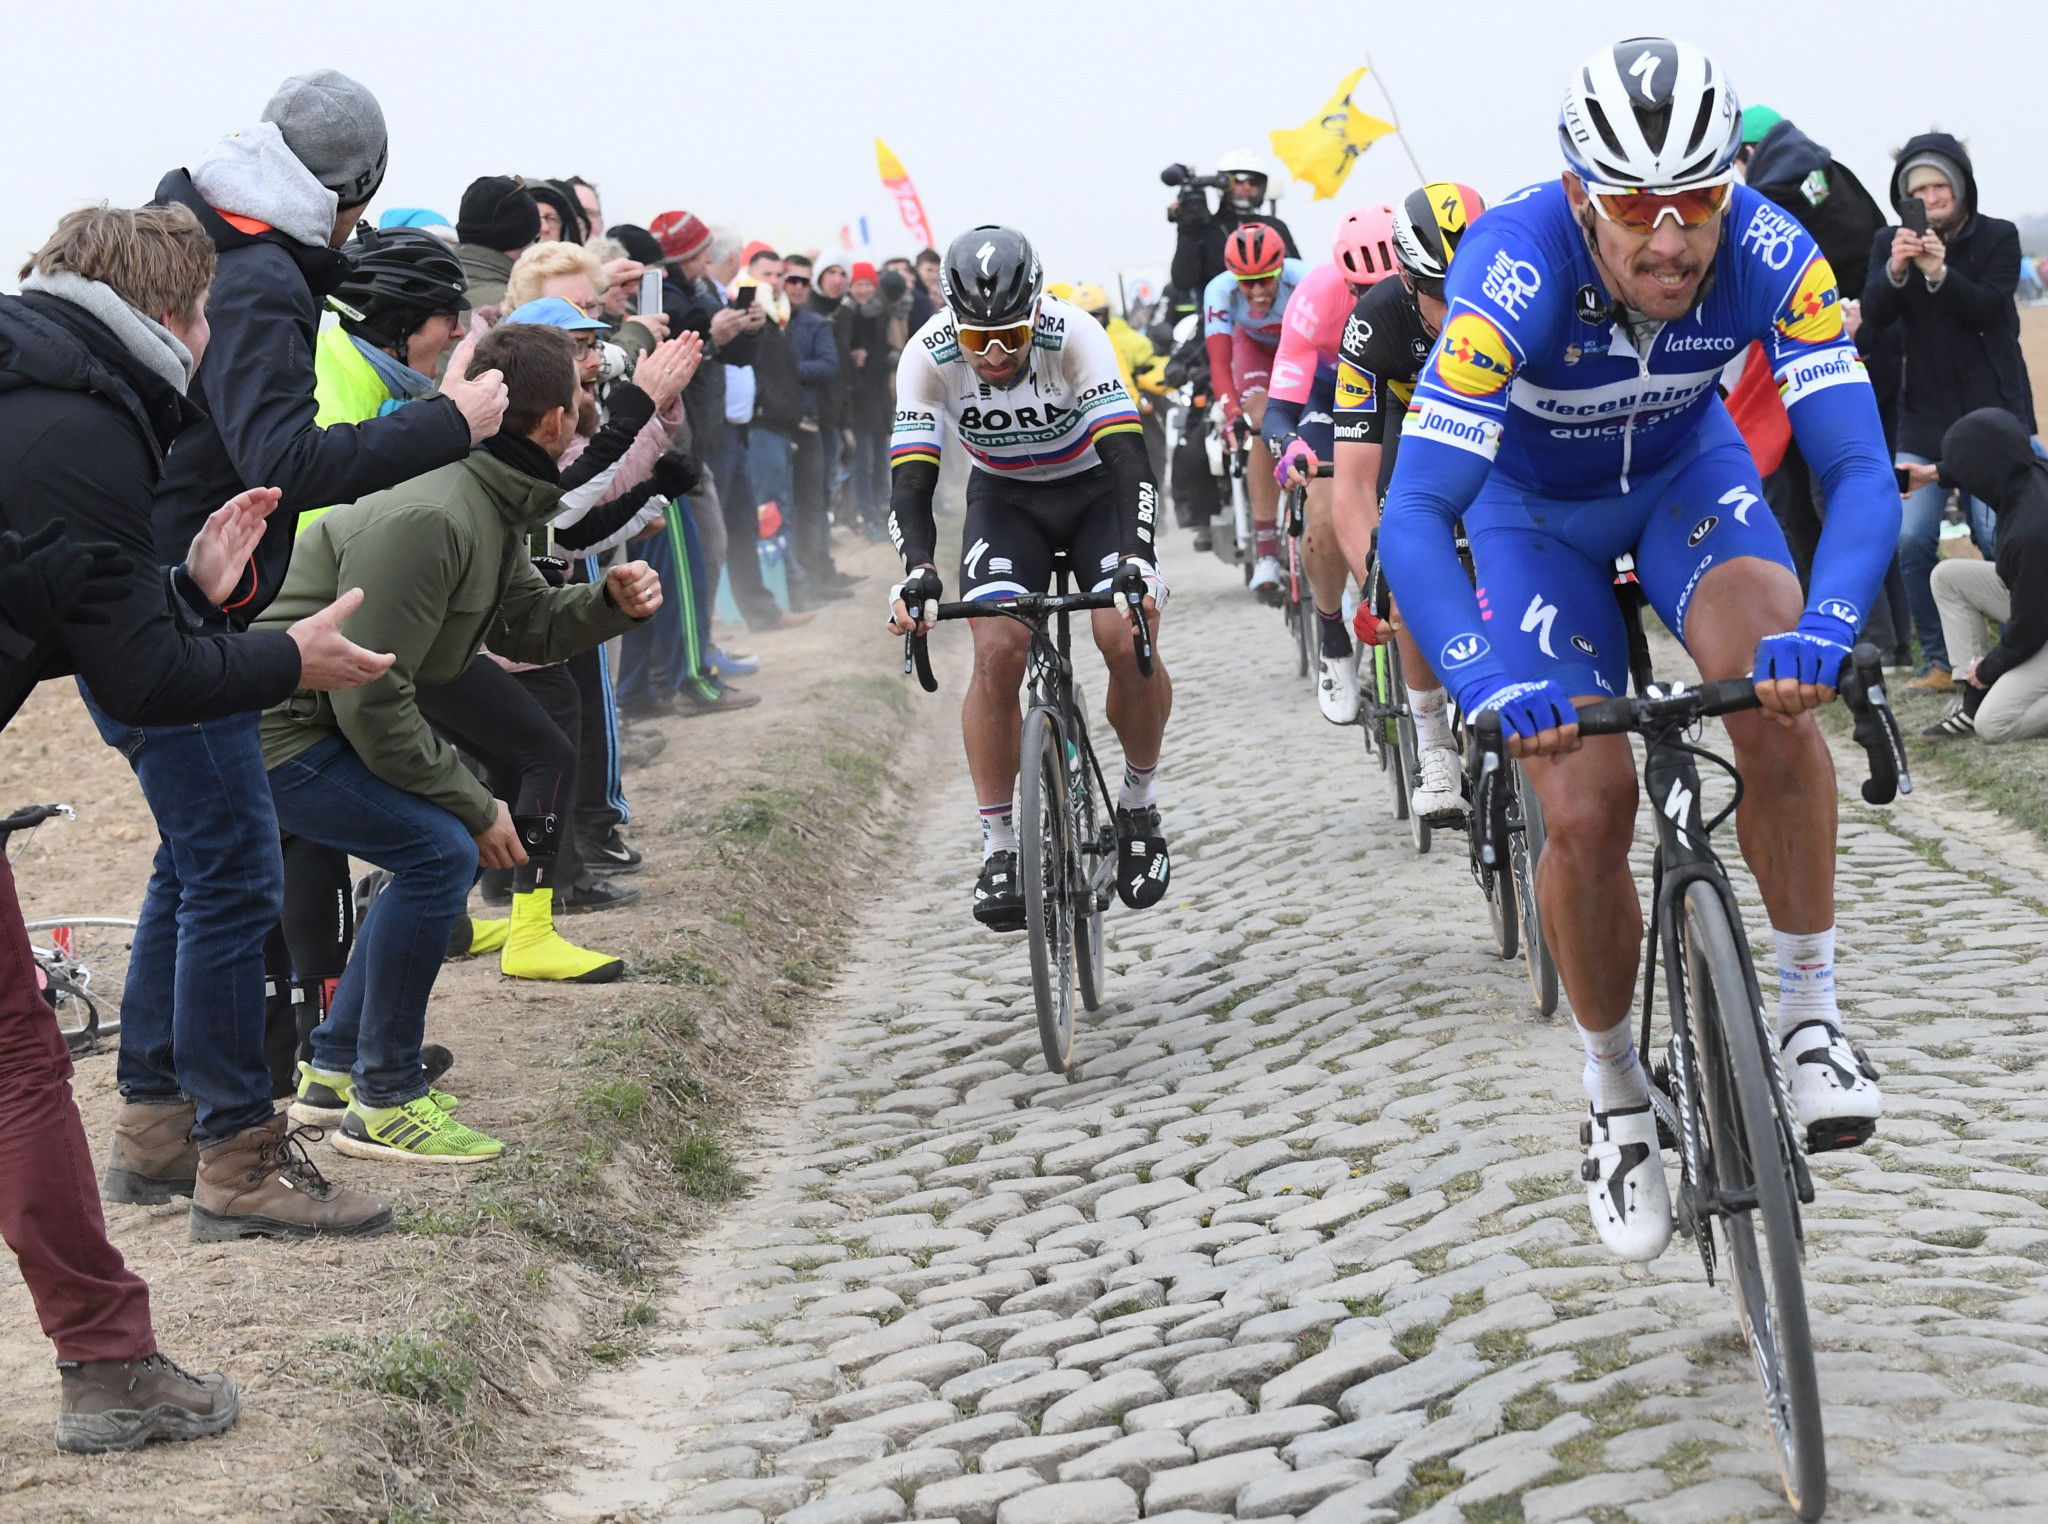 Paris-Roubaix is reportedly in doubt amid COVID-19 restrictions in France ©Getty Images